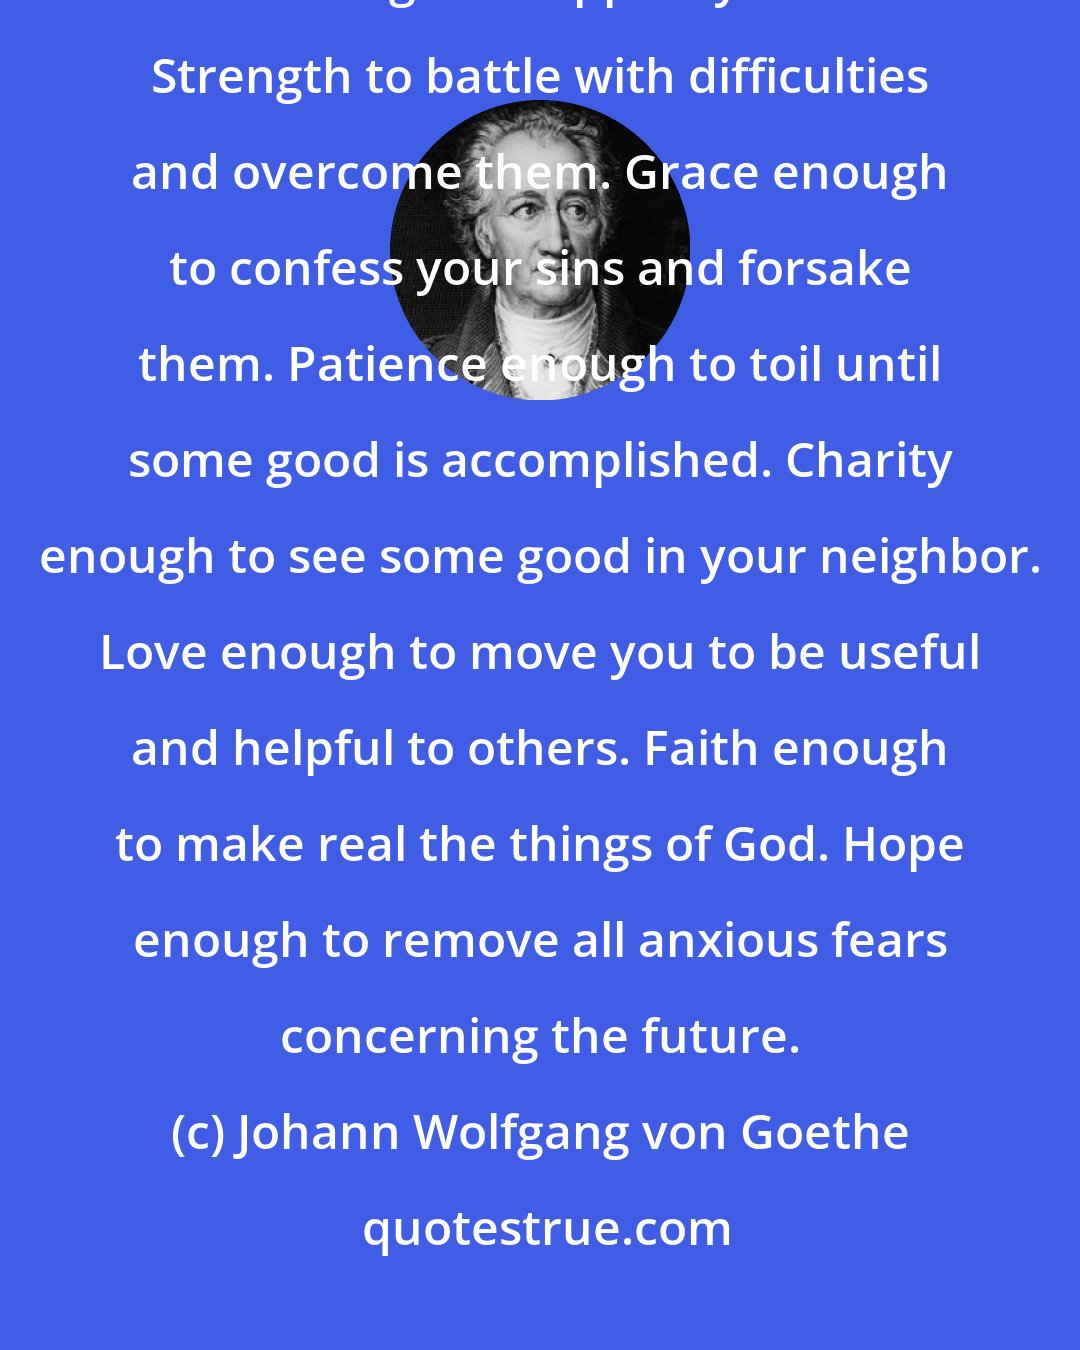 Johann Wolfgang von Goethe: Nine requisites for contented living: Health enough to make work a pleasure. Wealth enough to support your needs. Strength to battle with difficulties and overcome them. Grace enough to confess your sins and forsake them. Patience enough to toil until some good is accomplished. Charity enough to see some good in your neighbor. Love enough to move you to be useful and helpful to others. Faith enough to make real the things of God. Hope enough to remove all anxious fears concerning the future.